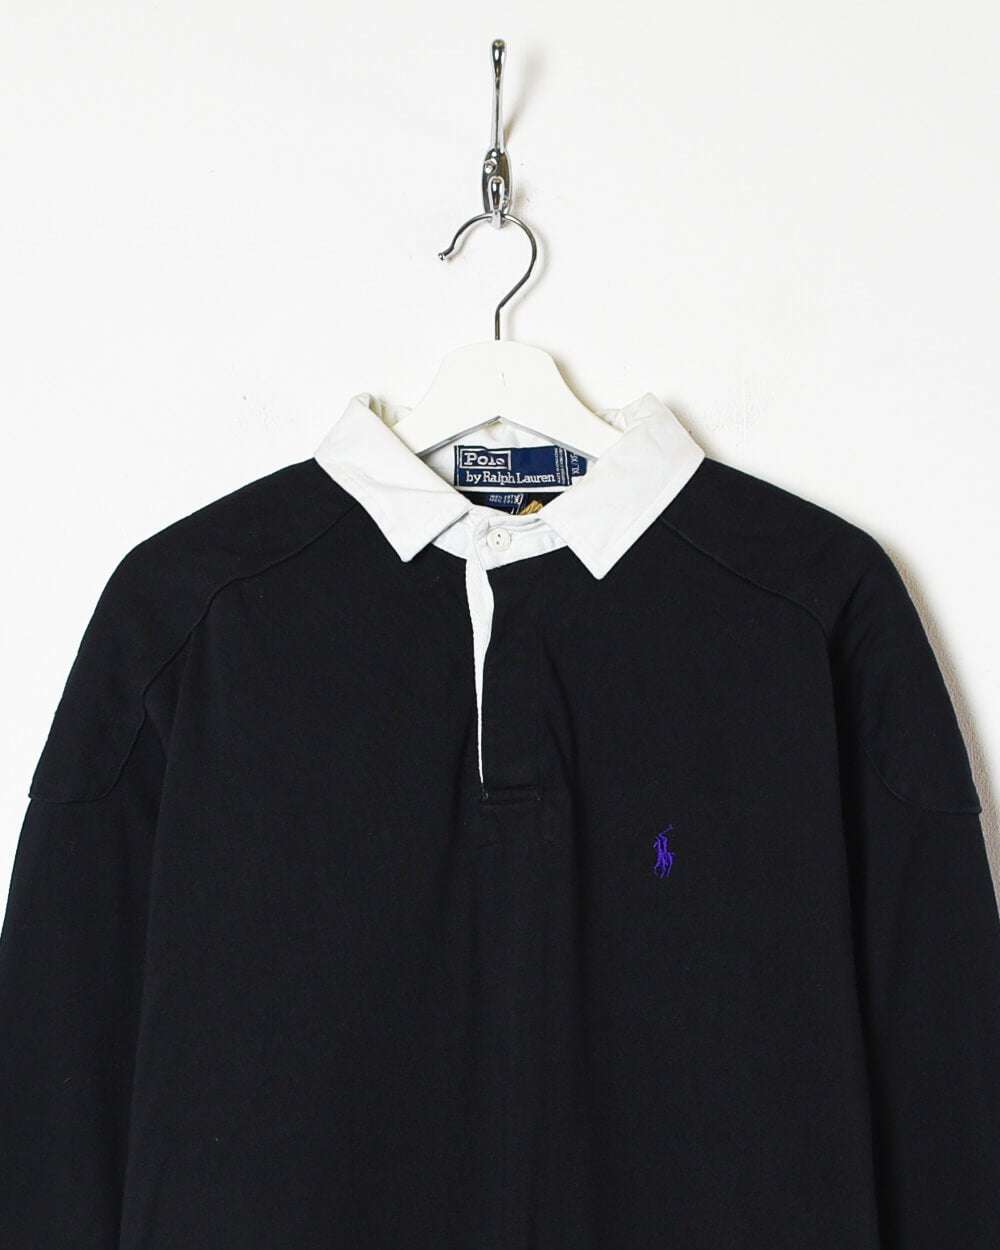 Black Polo Ralph Lauren Rugby Shirt - X-Large